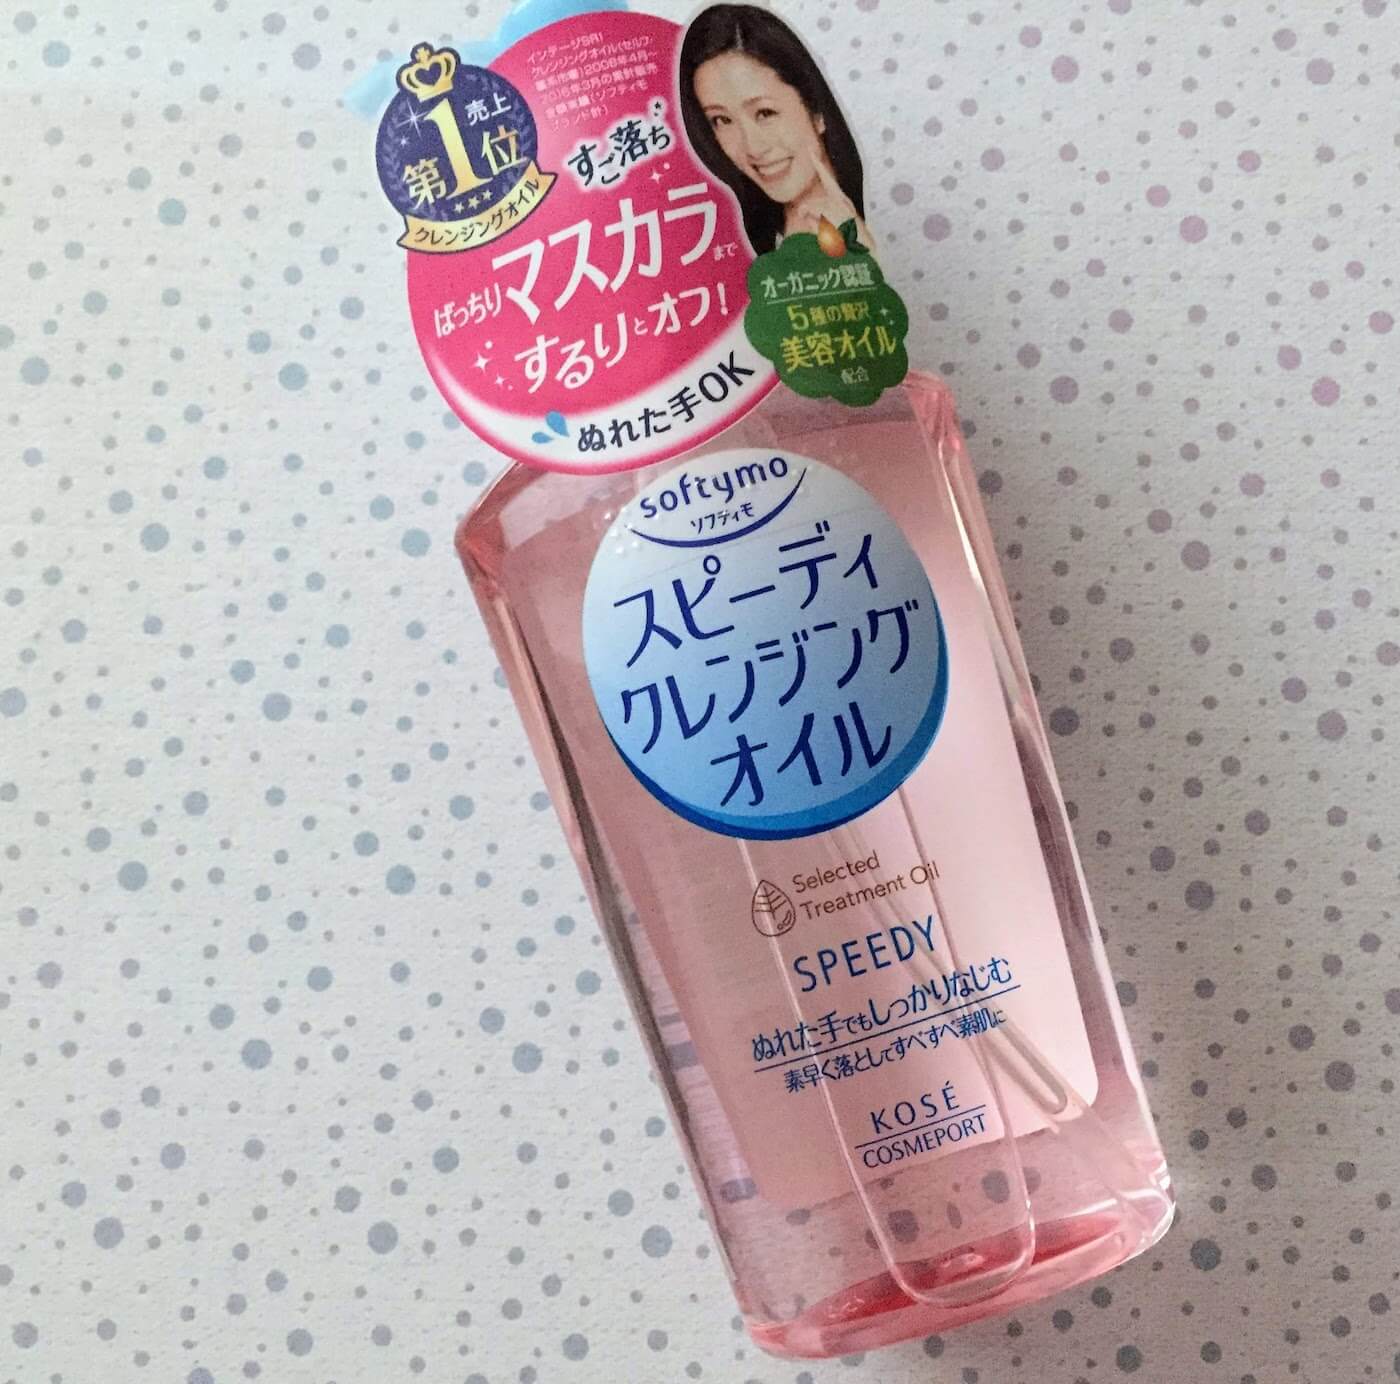 Kose Softymo Deep Treatment Cleansing Oil Review